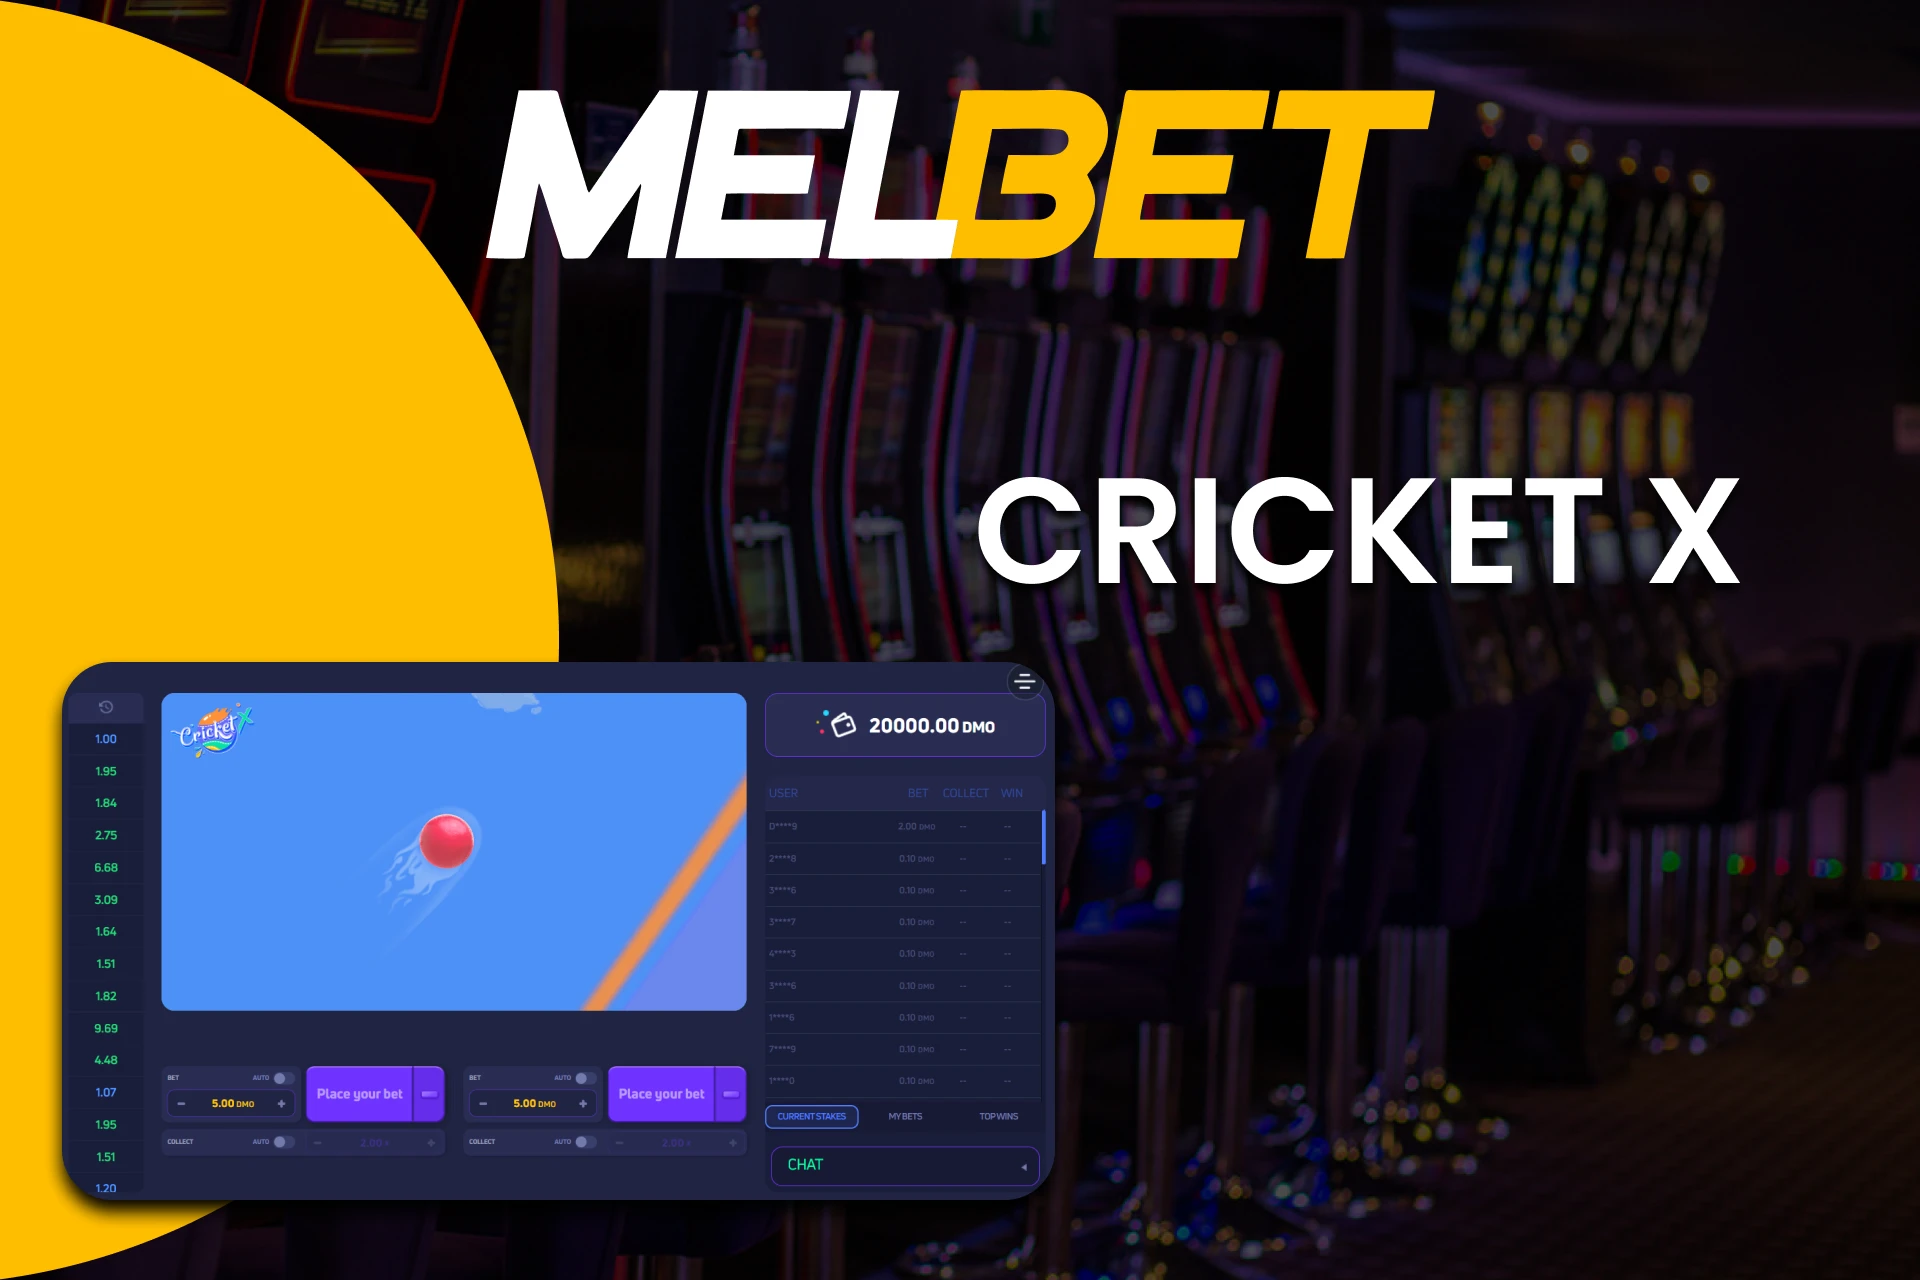 For games on Melbet, choose Cricket X.